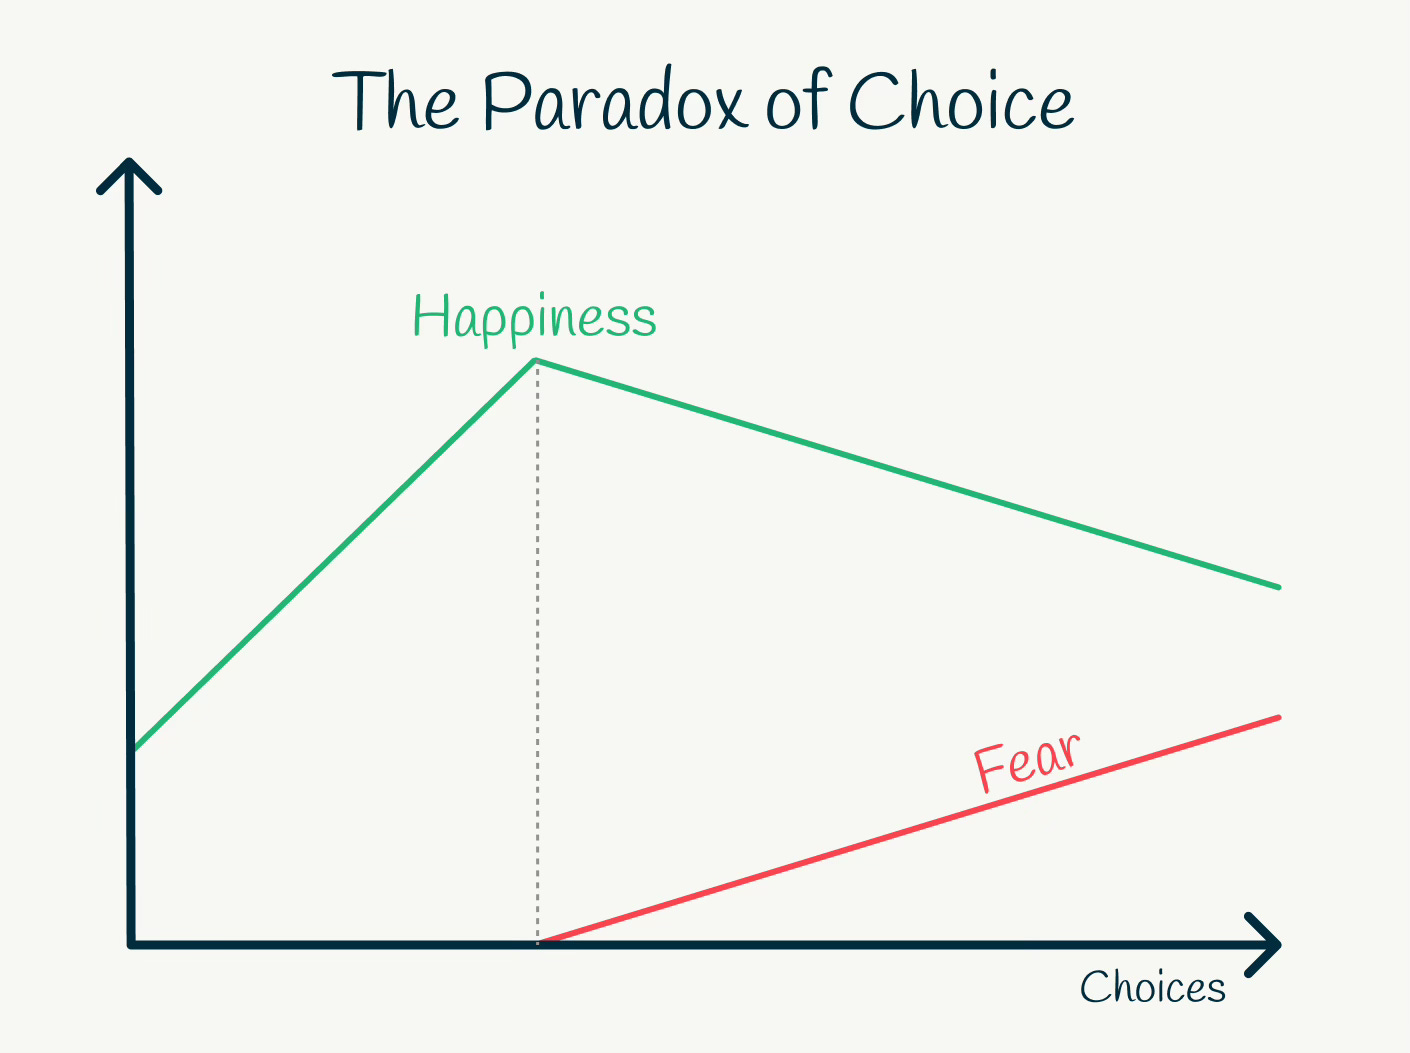 The Paradox of Choice Infographic